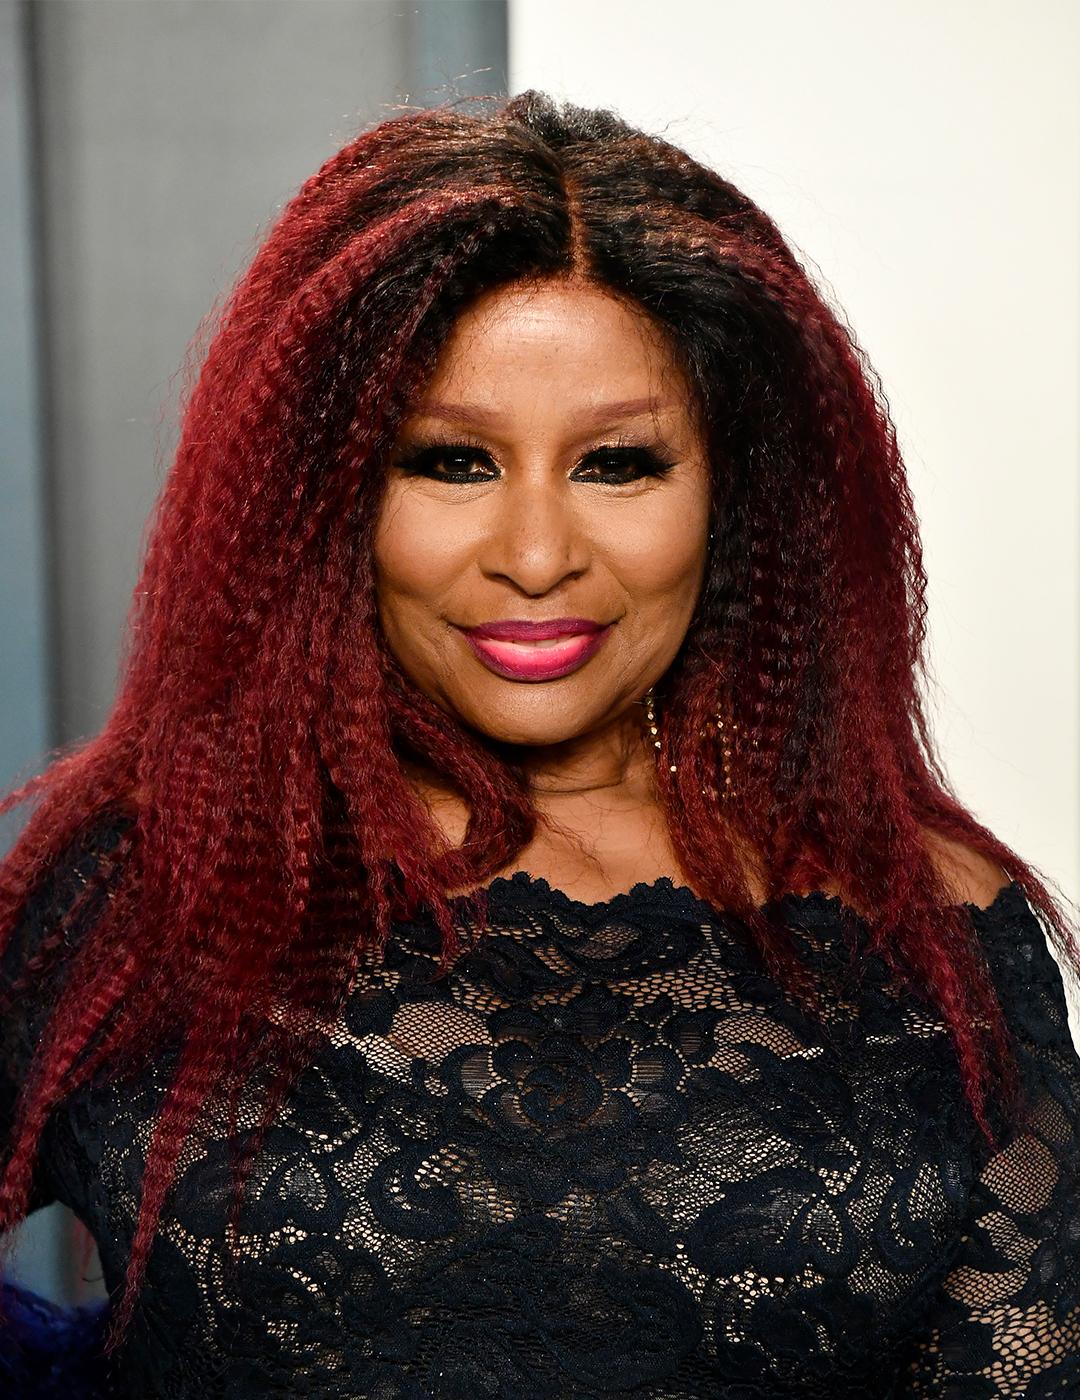 A photo of Chaka Khan wearing a black lace dress with her red colored crimped textured hair